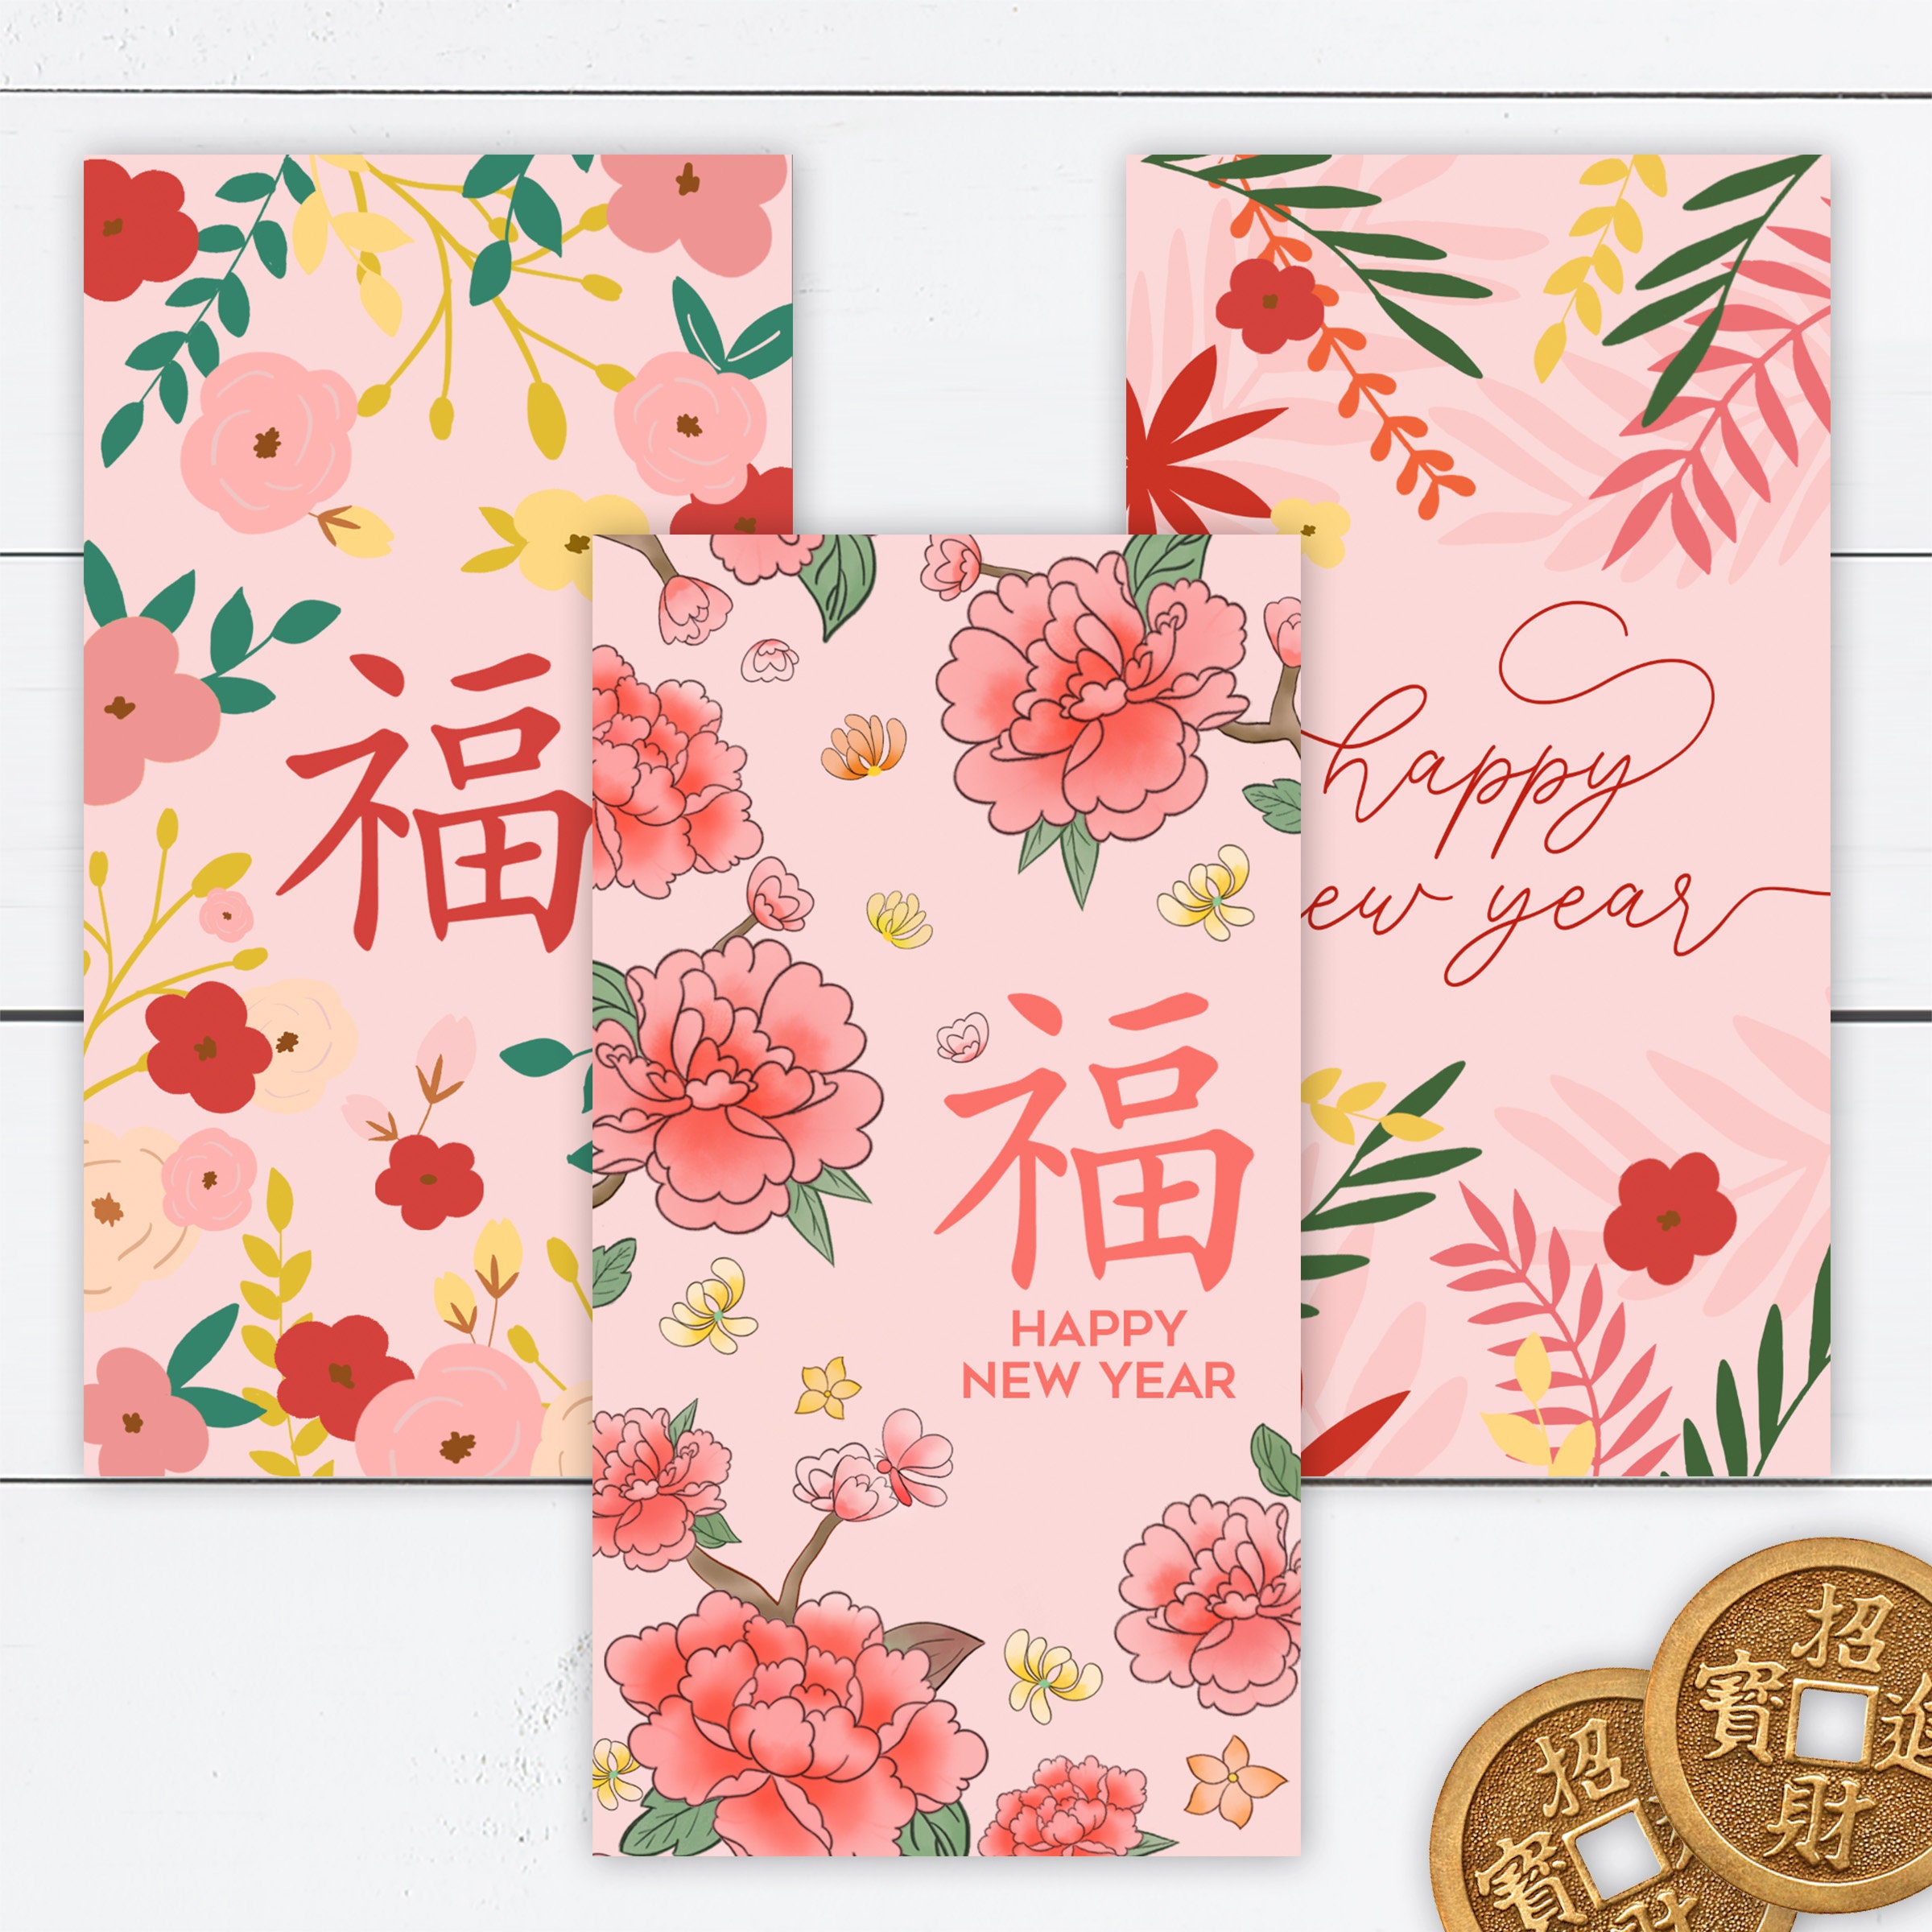 New Chinese New Year Cute Red Envelope Personalized Creative Red